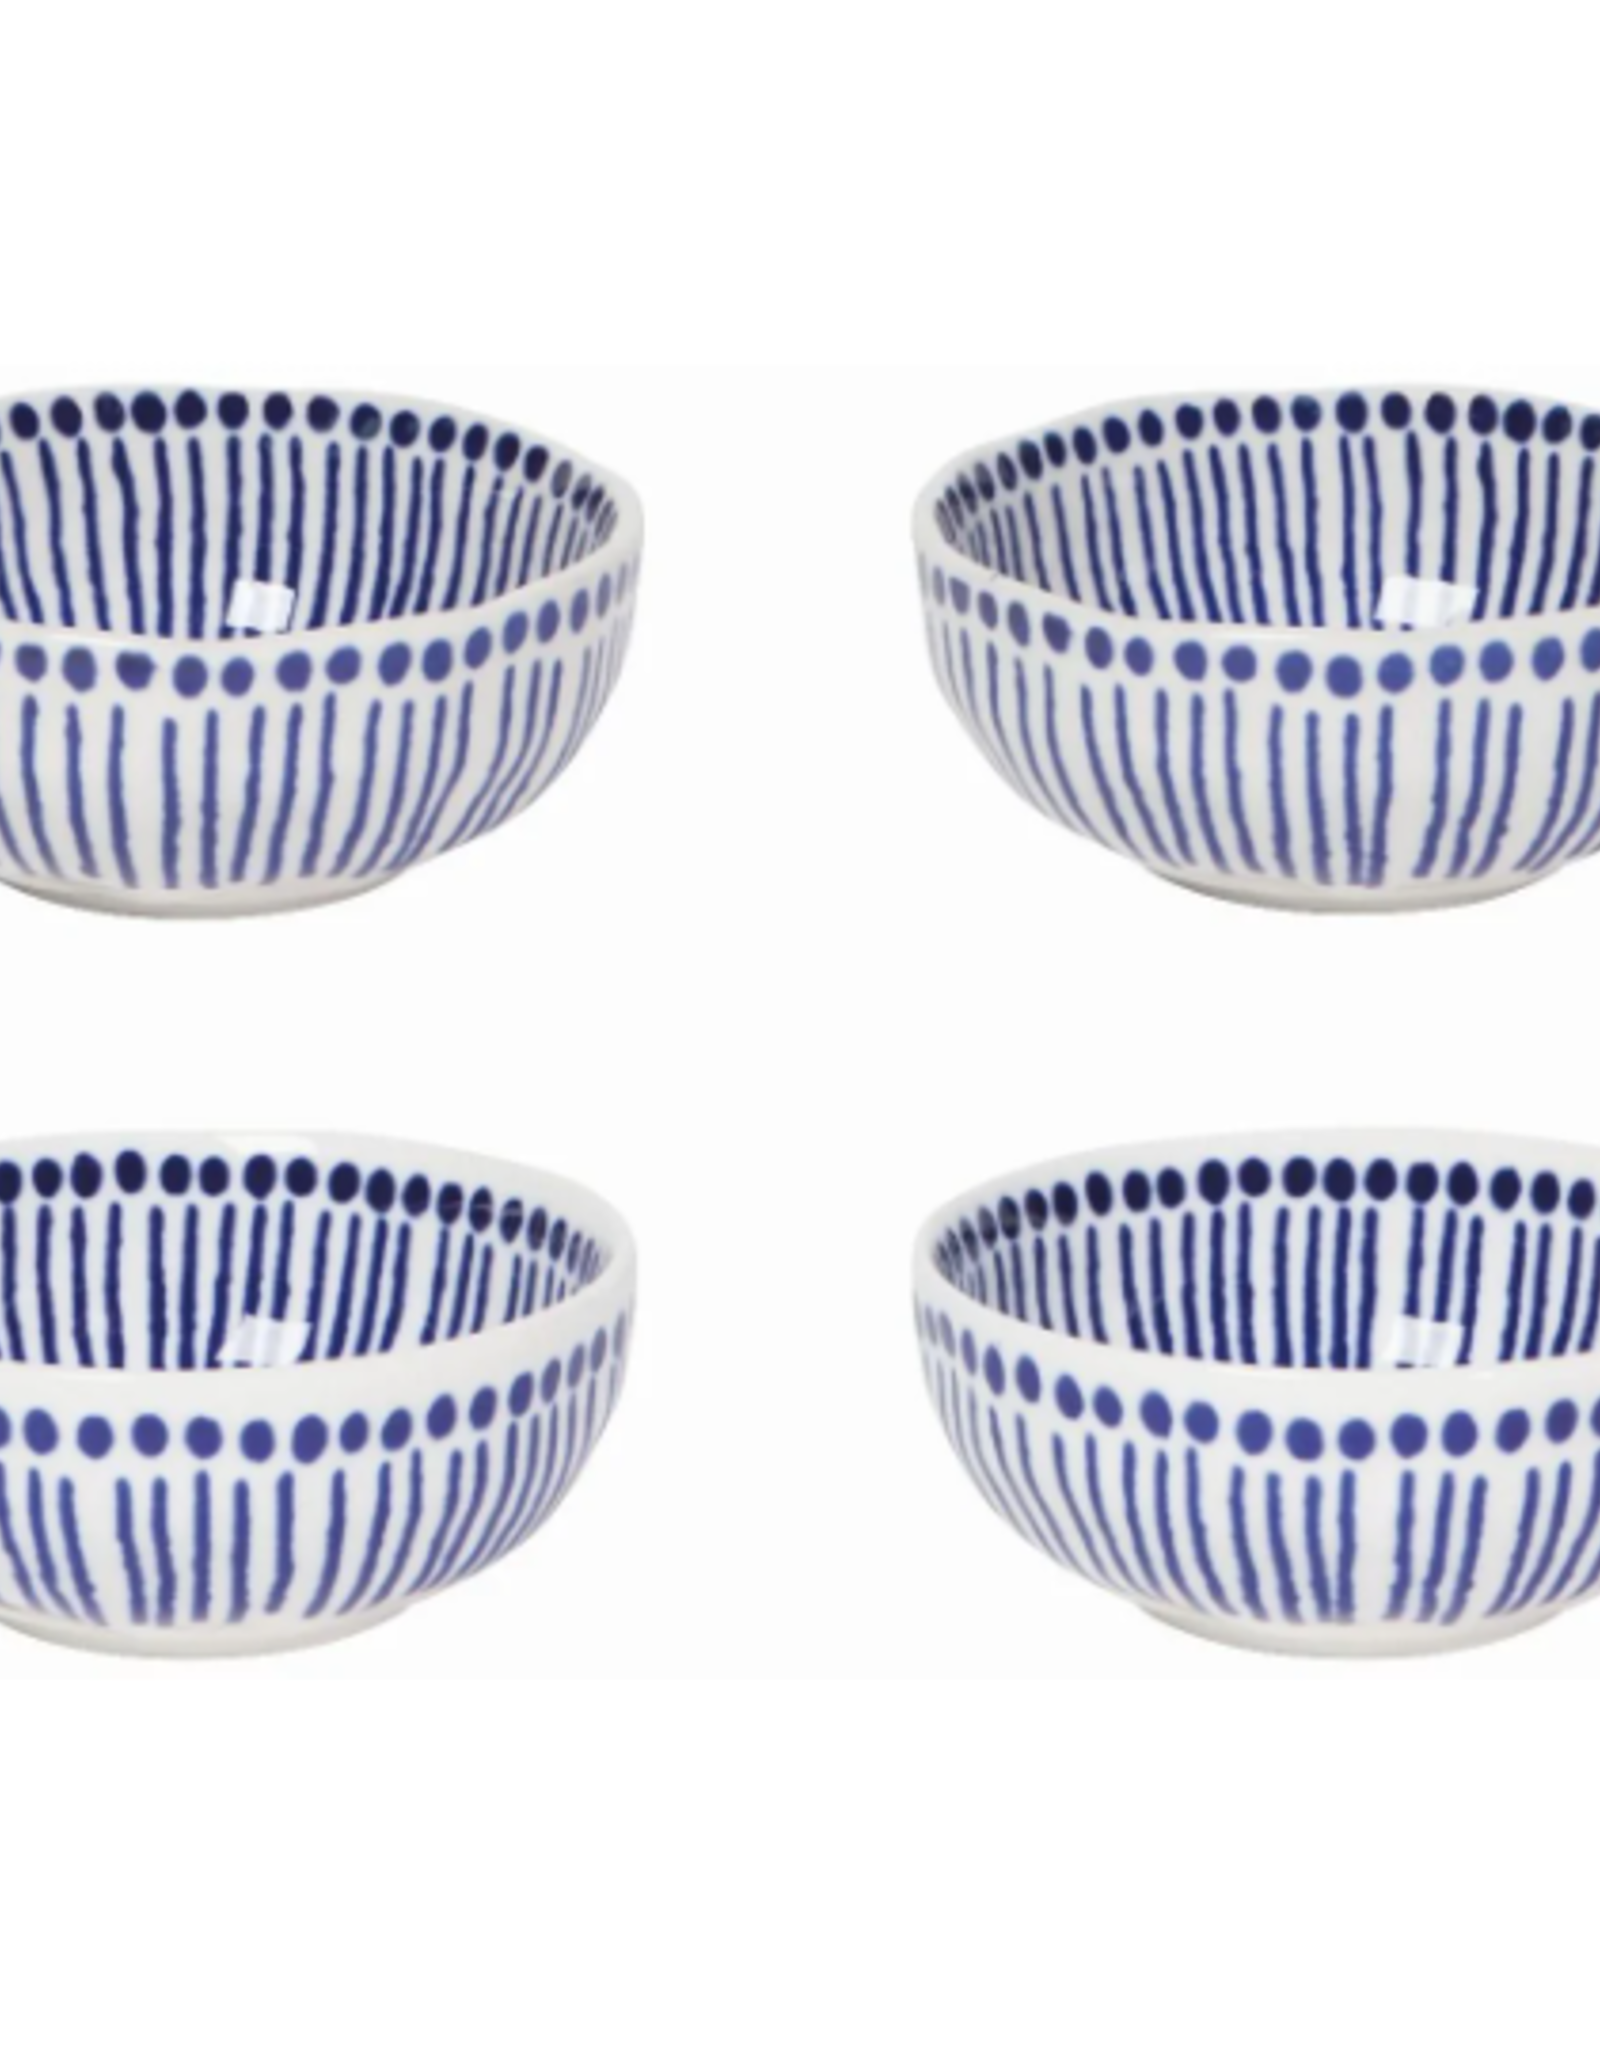 Danica + Now Designs Pinch Bowl - Sprout Set of 4